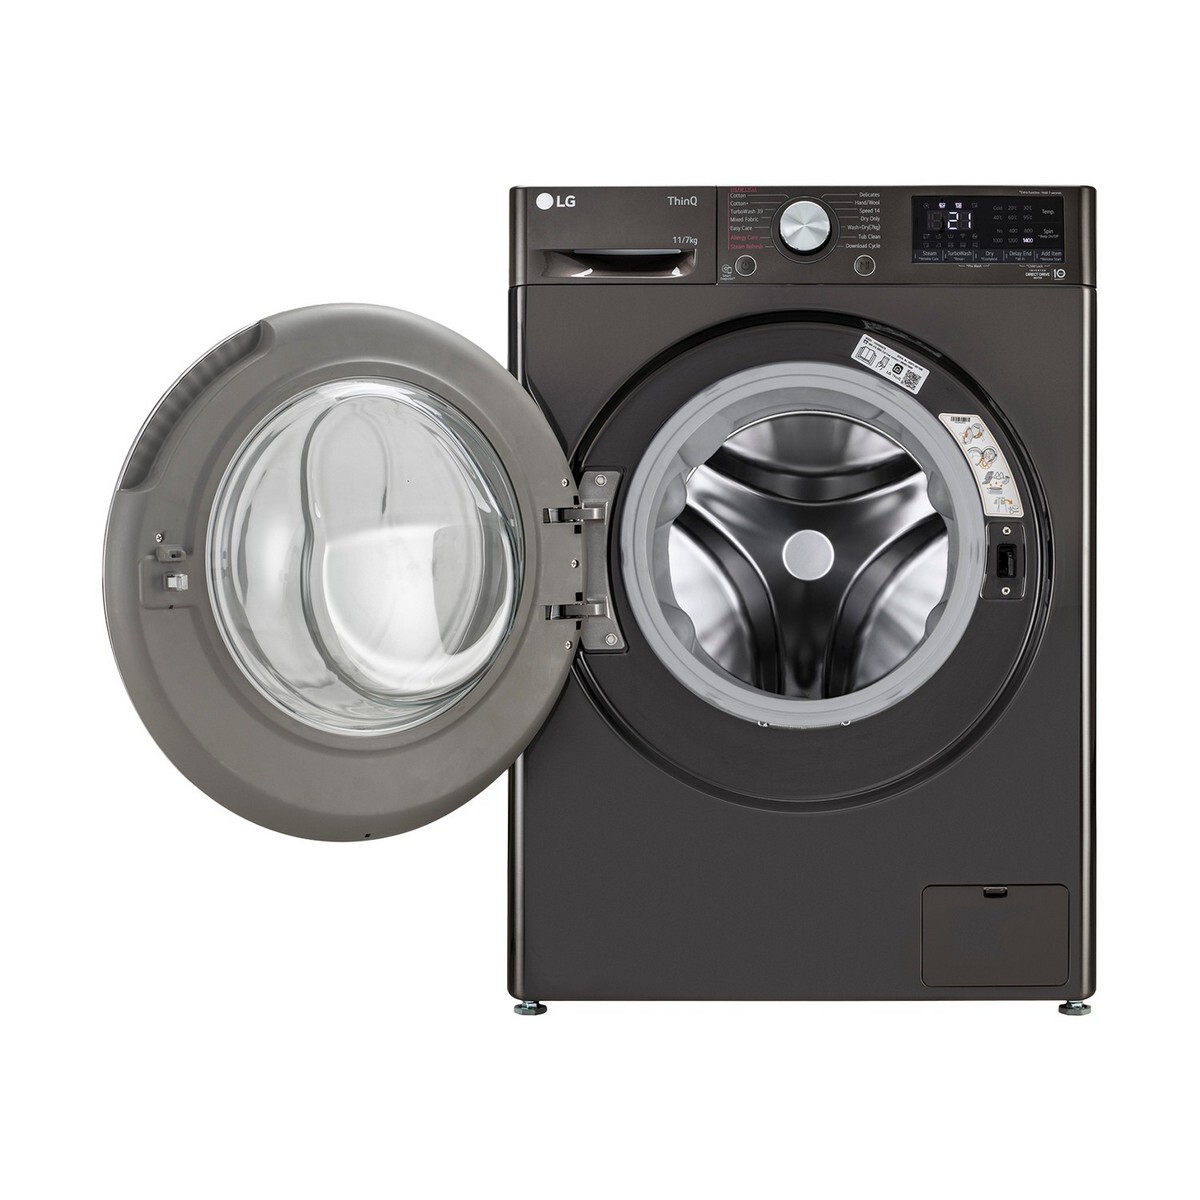 LG Fully Automatic Front Load Washer Dryer FHD1107STB 7 Kg Black VCM